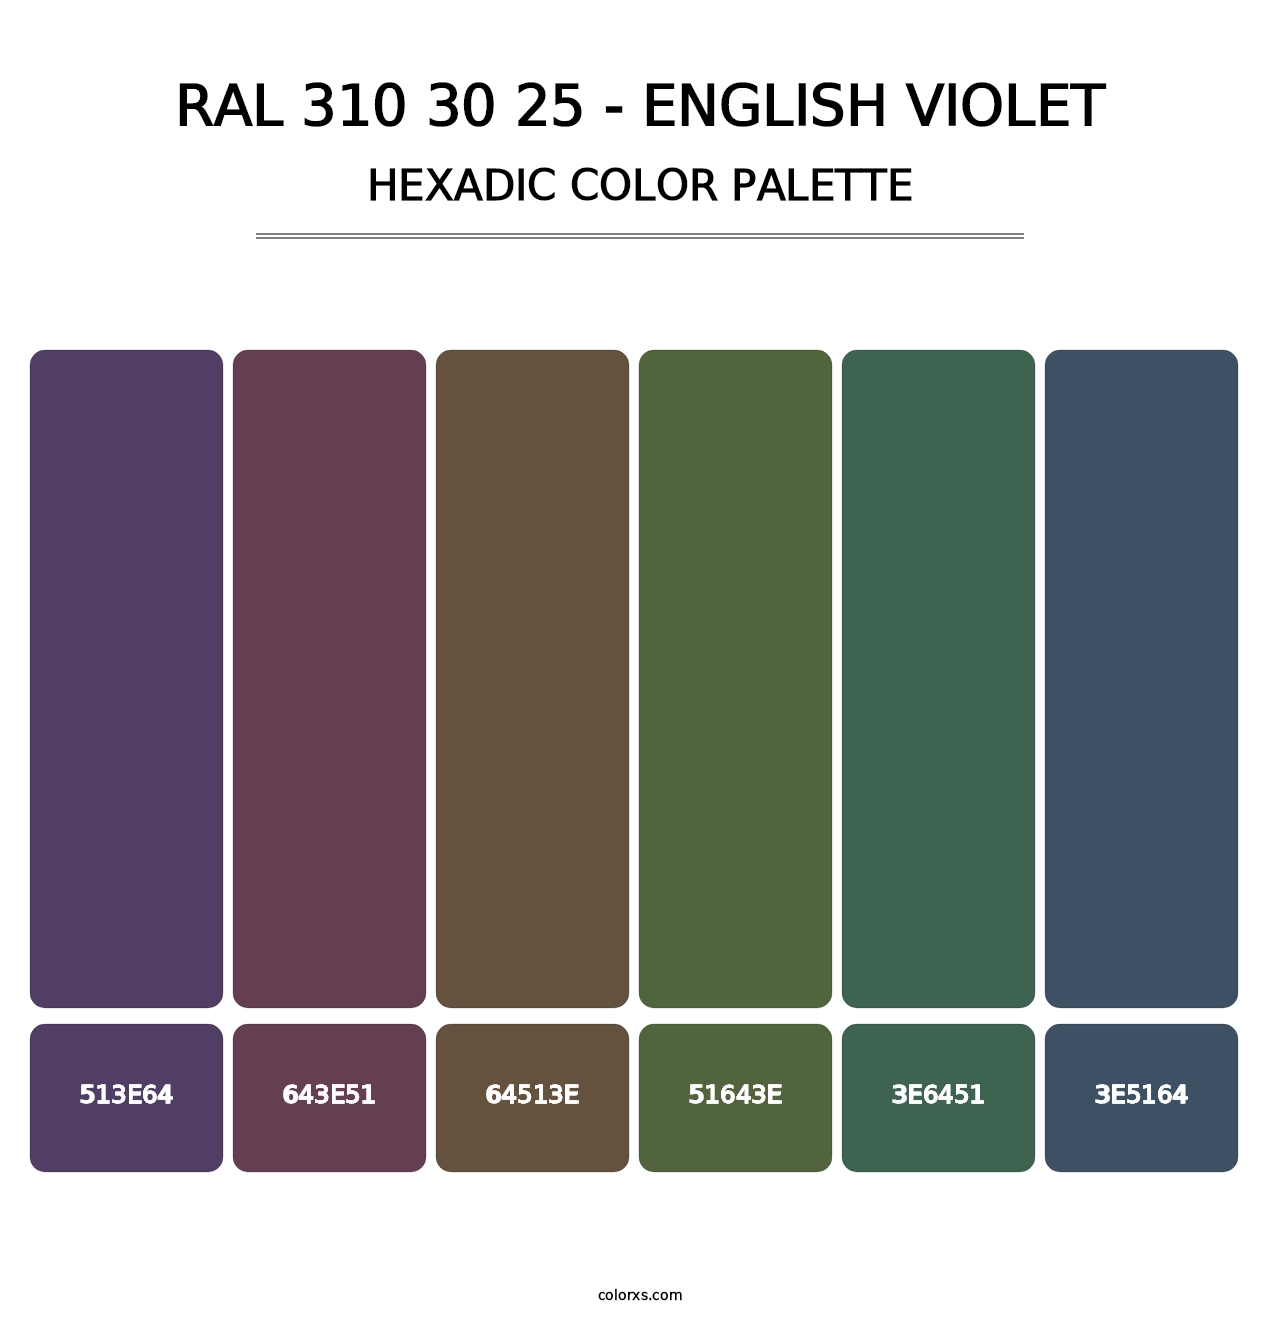 RAL 310 30 25 - English Violet - Hexadic Color Palette